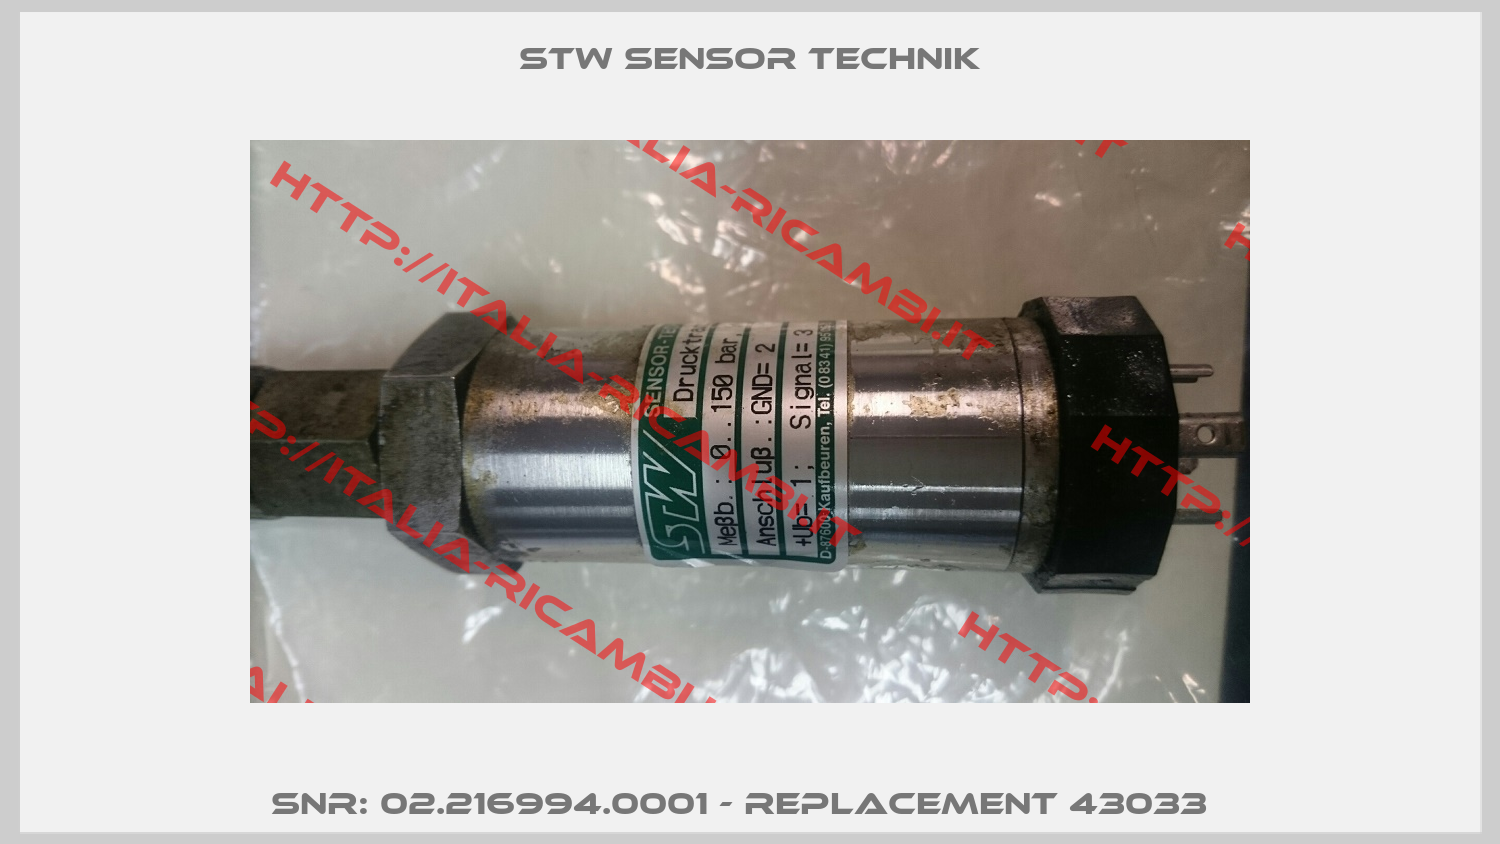 SNr: 02.216994.0001 - replacement 43033  -0